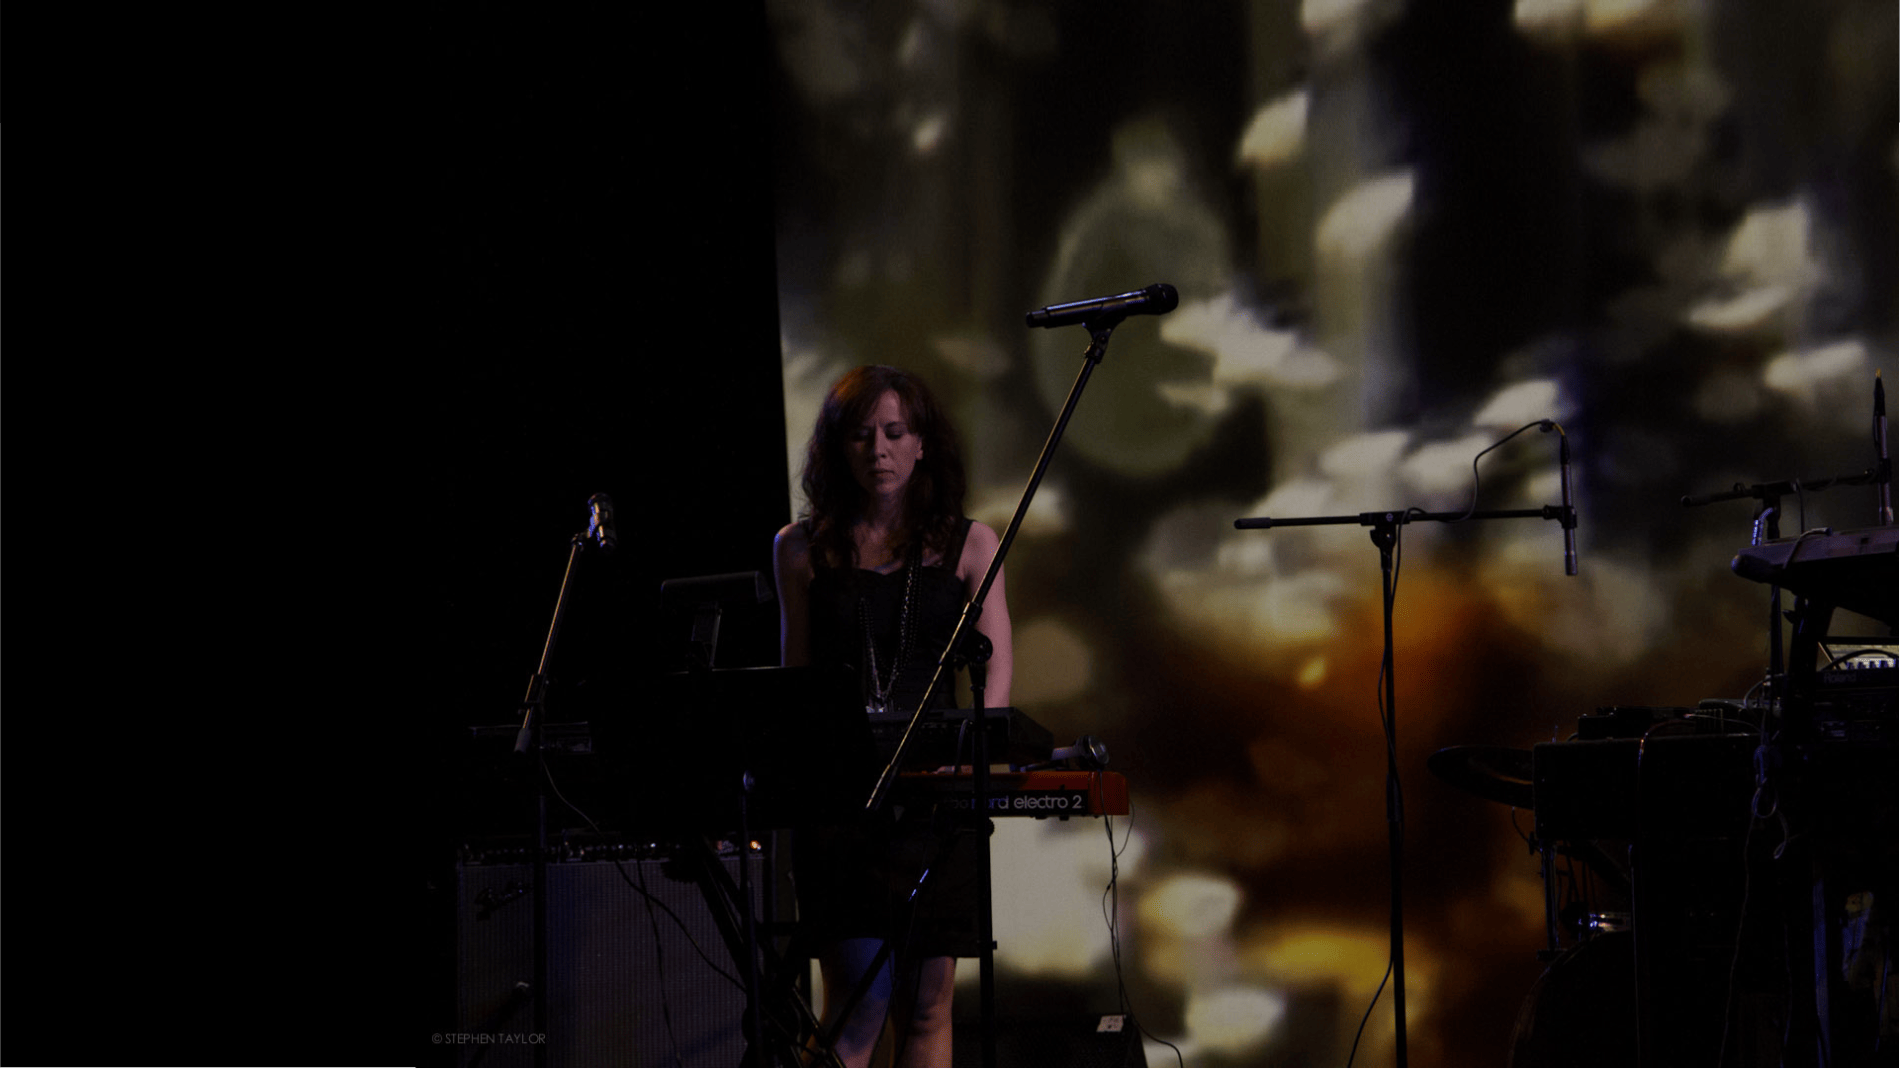 Missy Mazzoli performing on stage